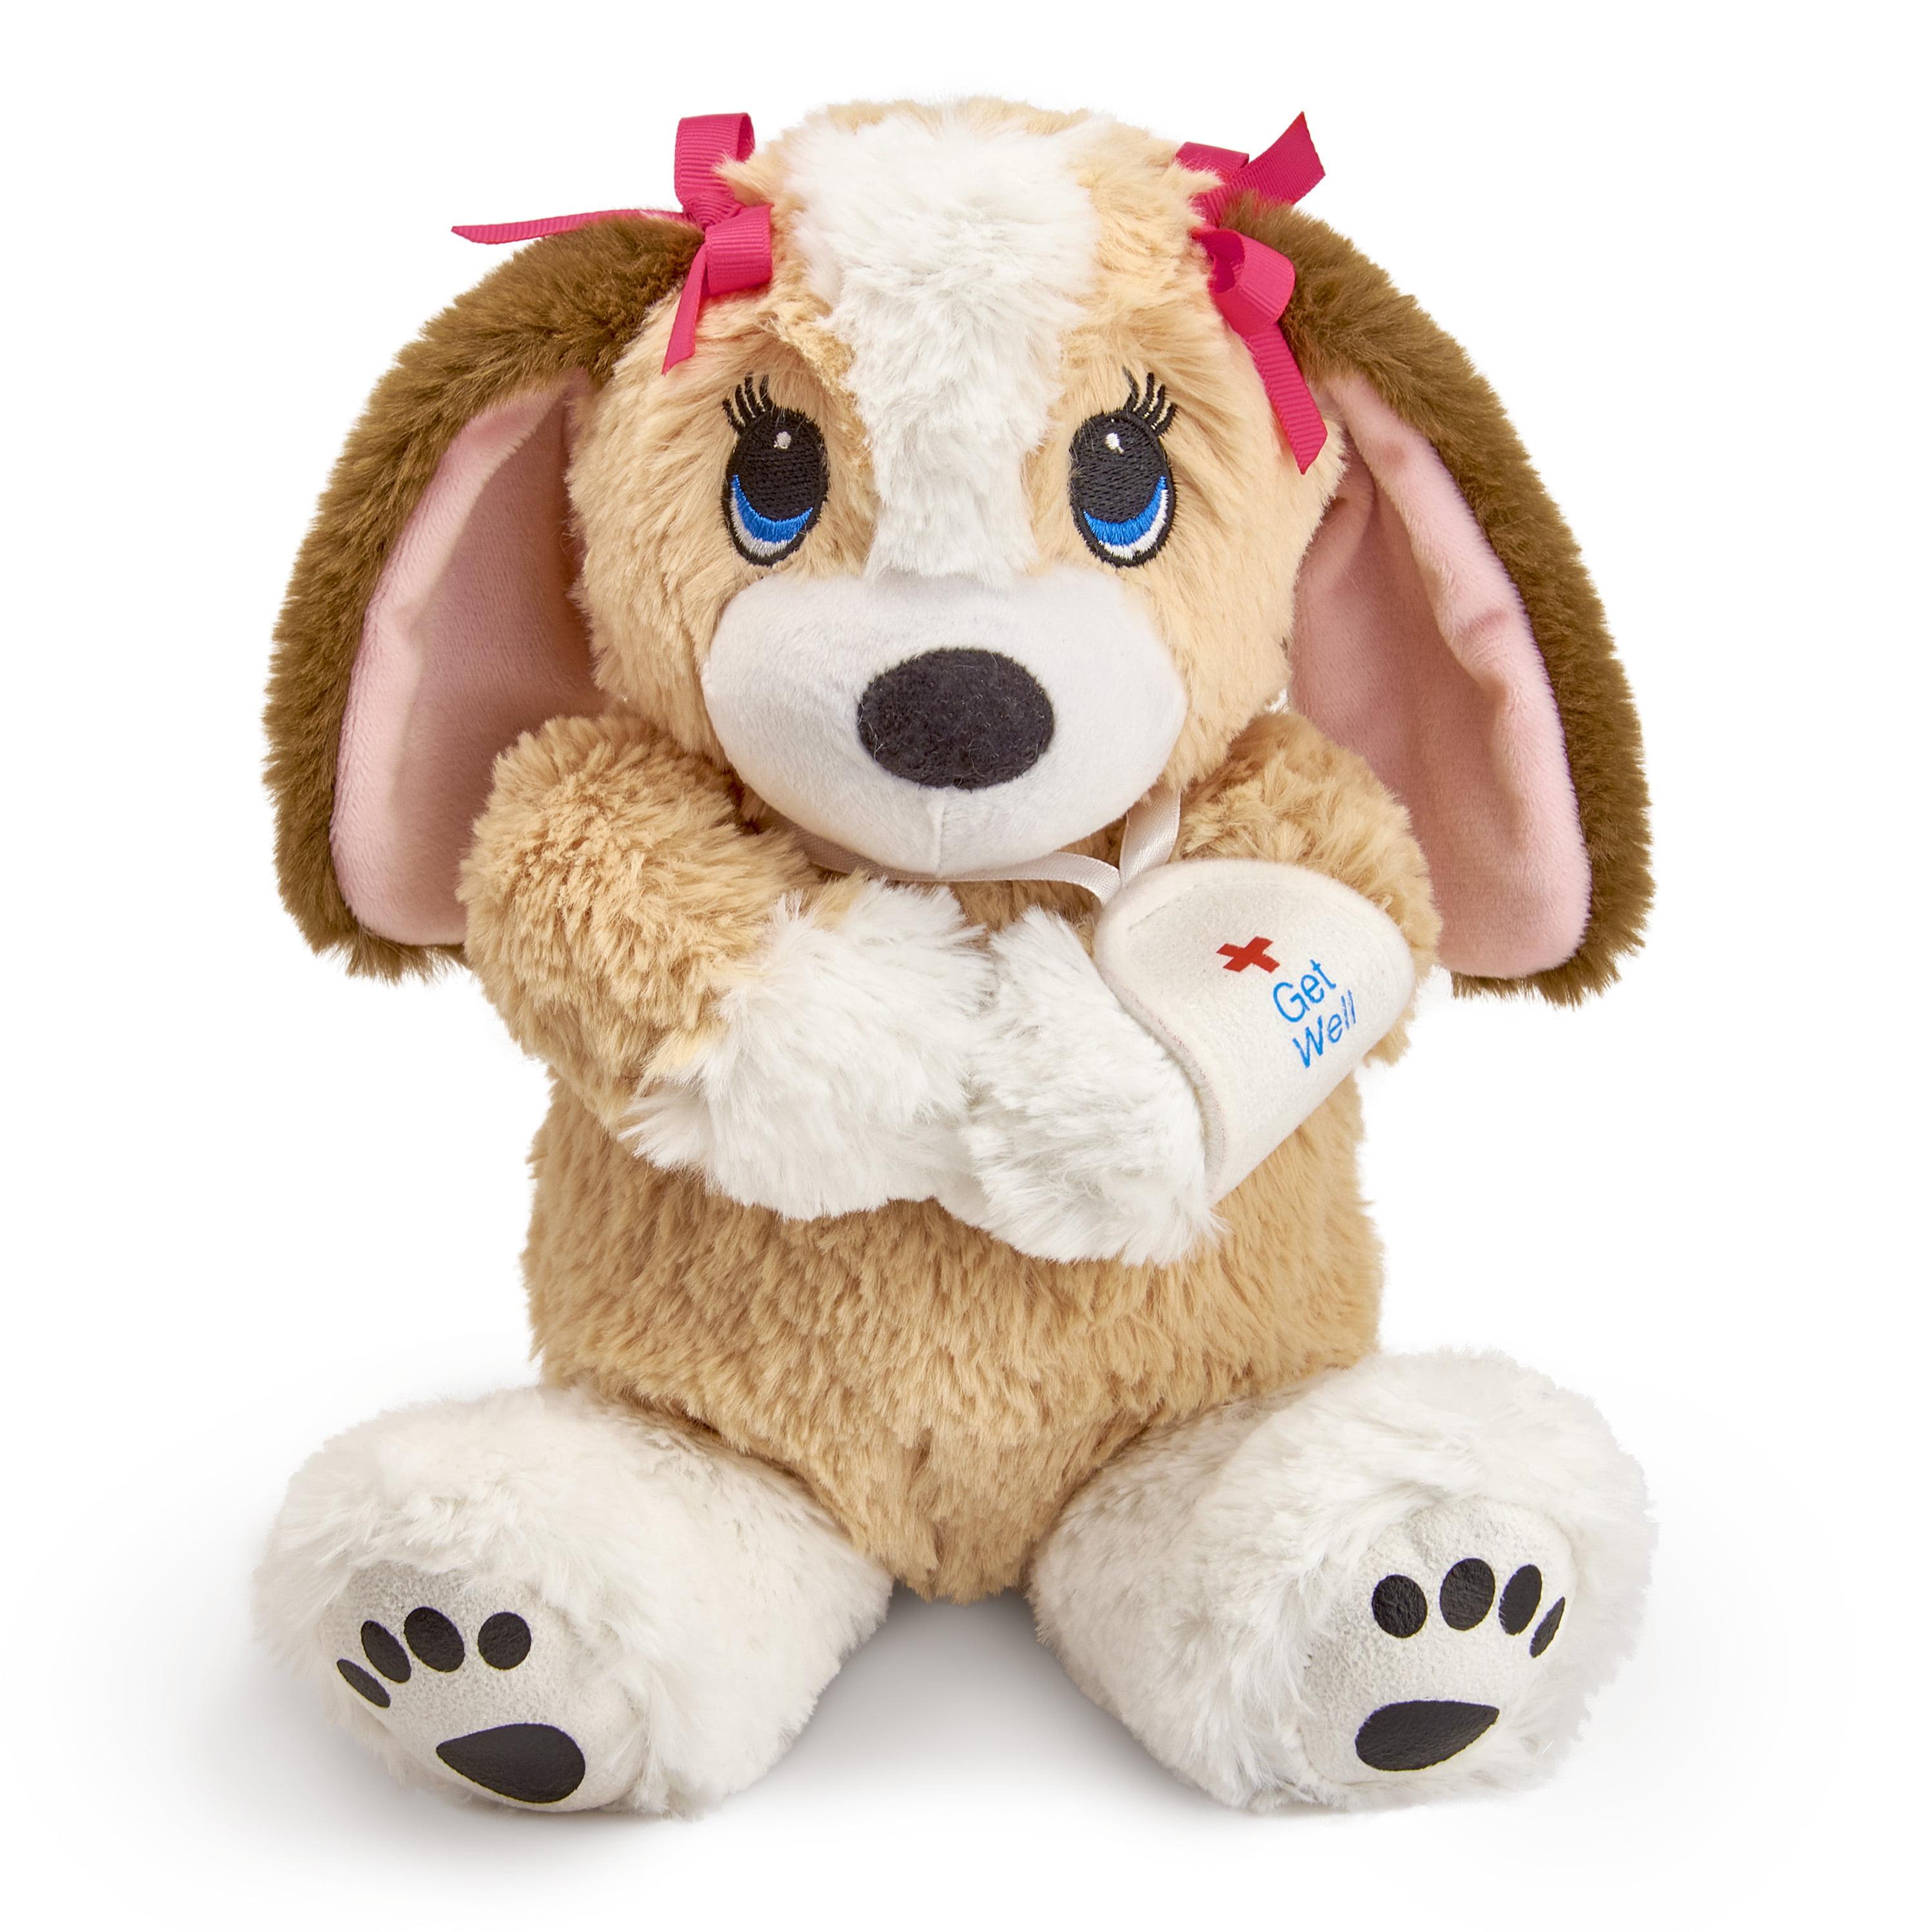 Get Well Plush Puppy Dog - Super Cute Large Stuffed Animal Toy - Big,  Fuzzy, Cozy & Fluffy Brown Puppy With Cast Arm - Comforting Stuff Animals  for Boys and Girls –